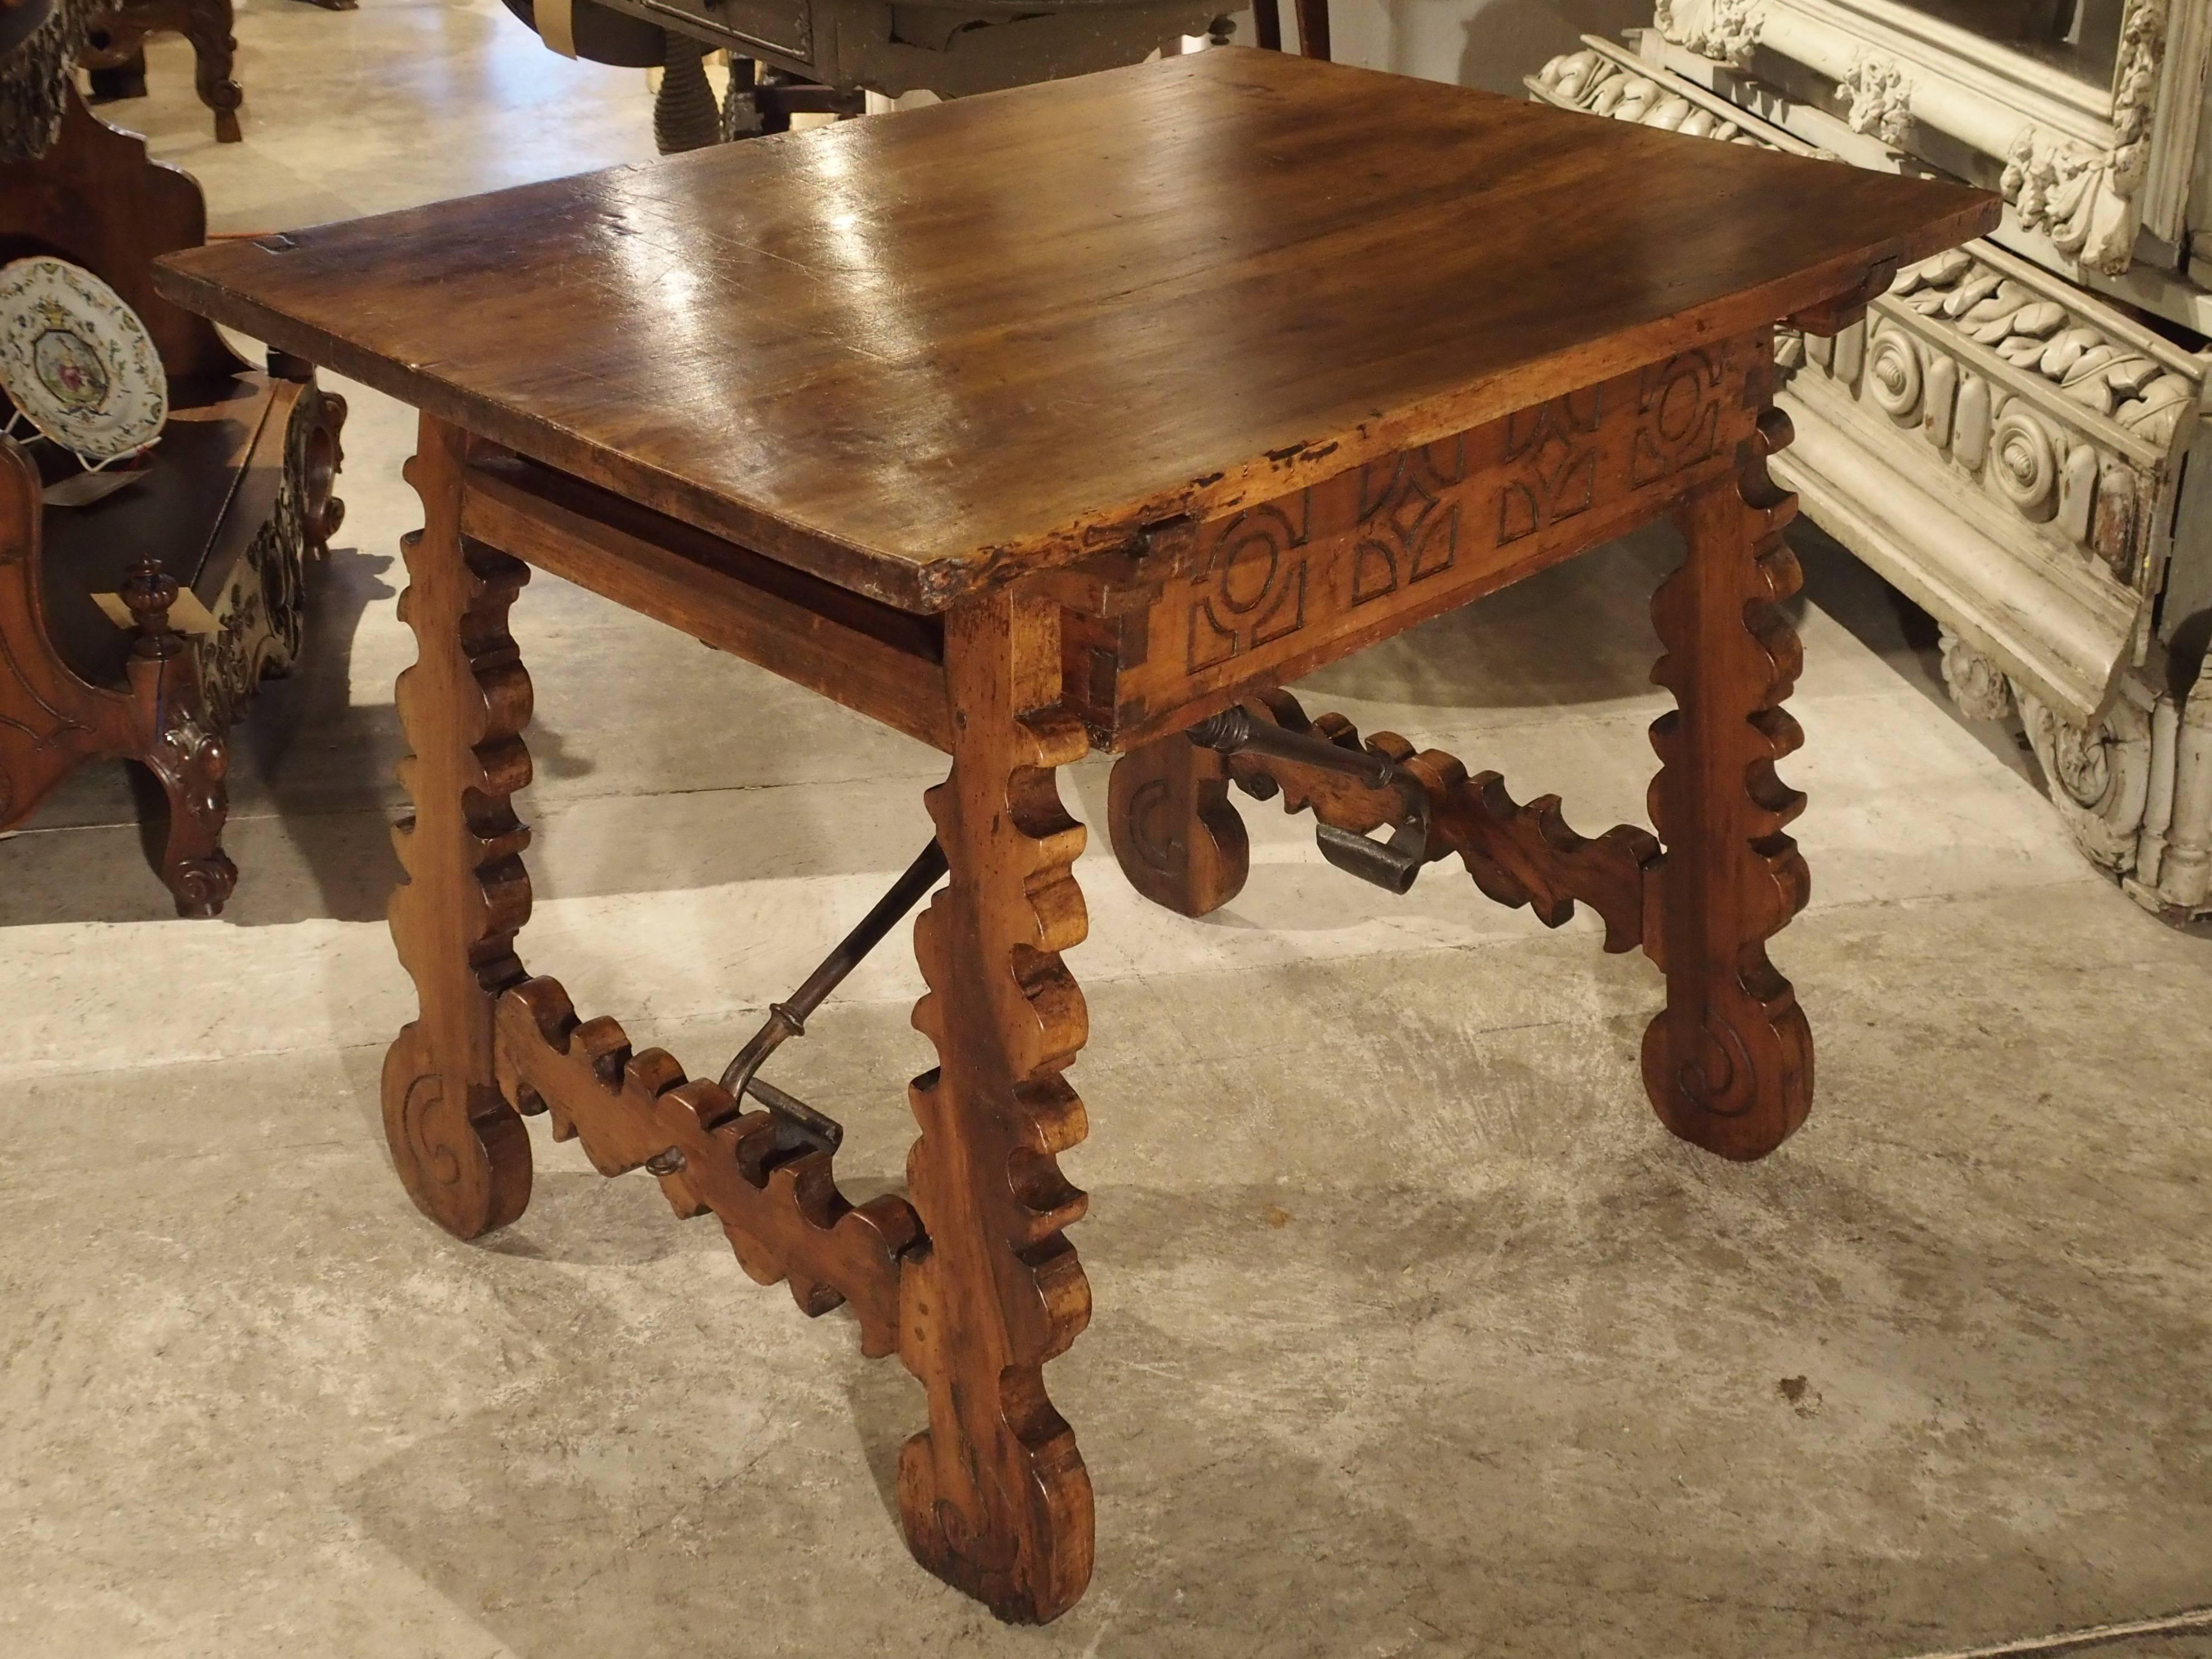 Wrought Iron 17th Century Walnut Wood Table from Northern Spain